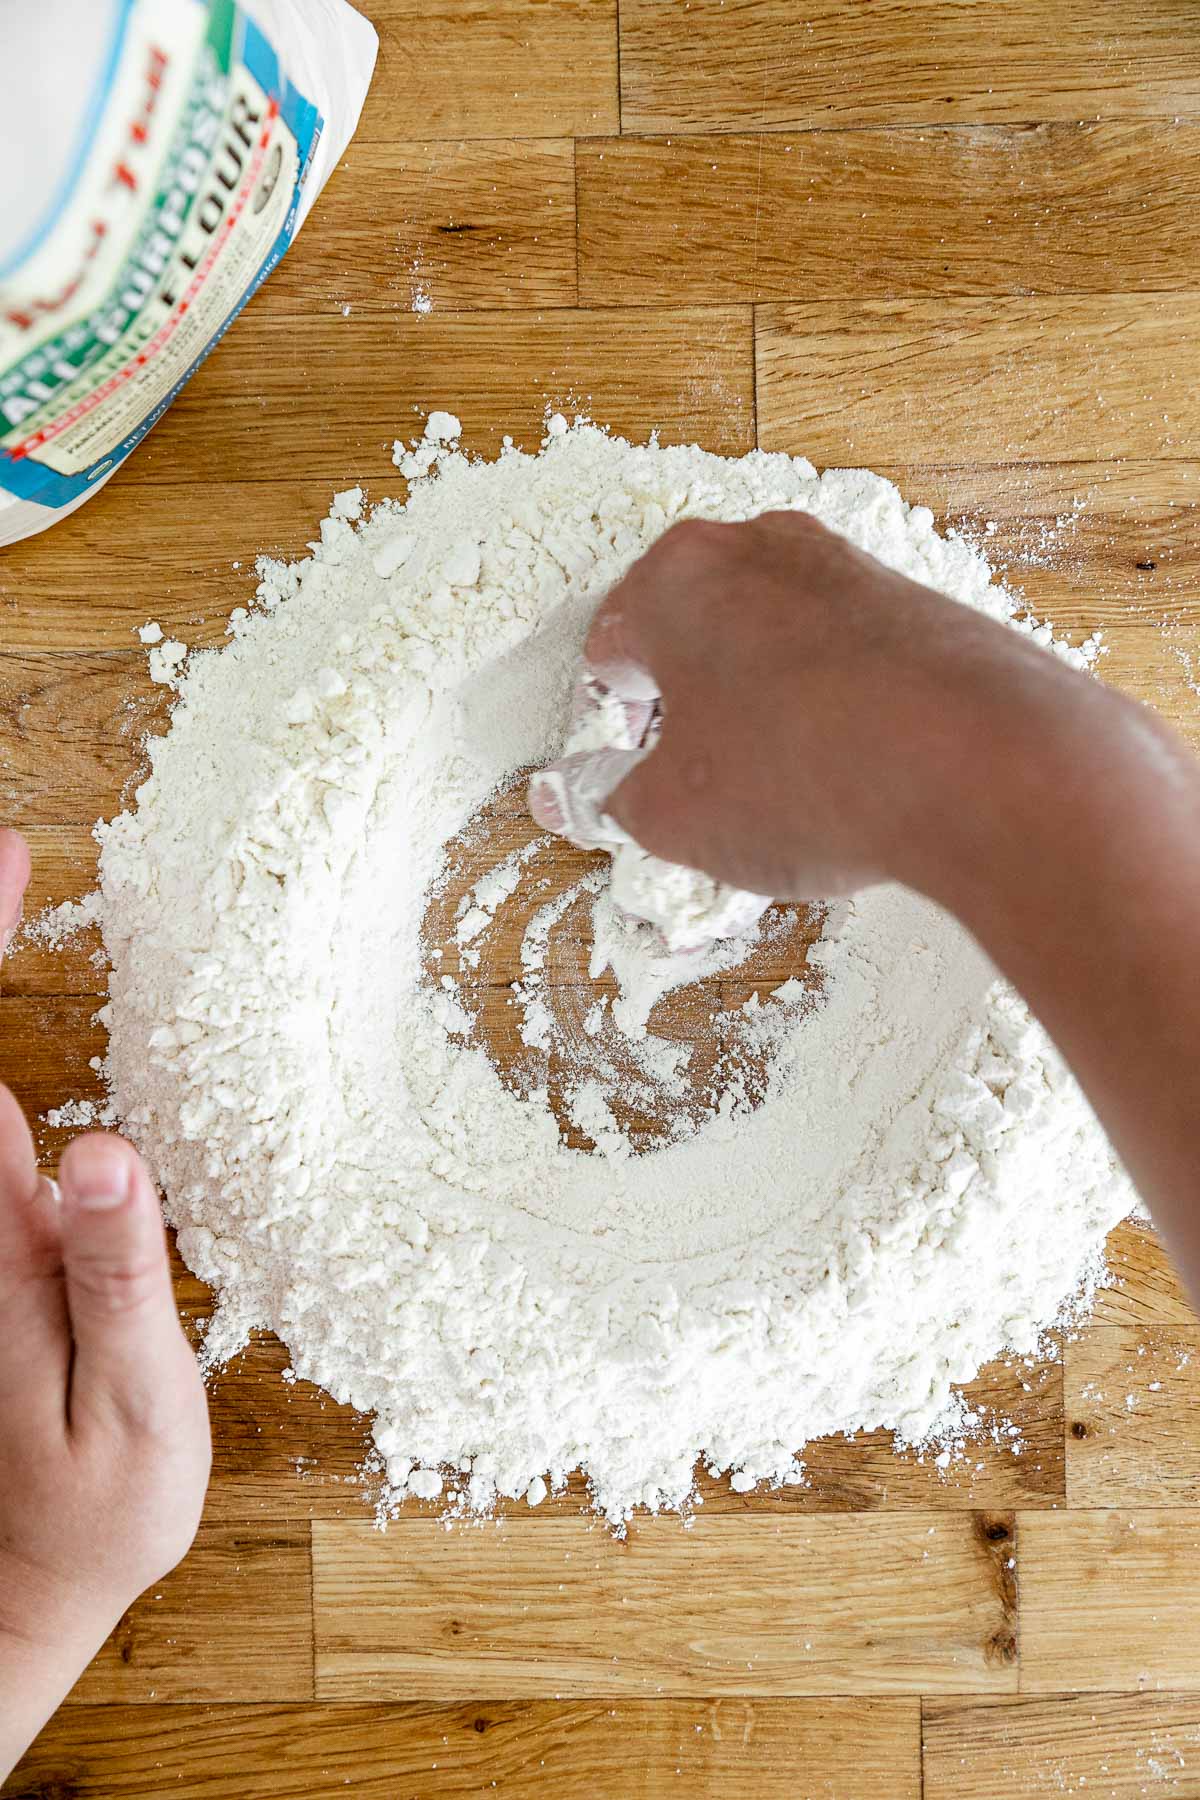 How to Make Homemade Pasta, Step 1: Mixing the flours. An overhead shot of Jess of Plays Well With Butter creating a large well in the center of a flour mixture with her hands. The well of flour sits atop a butcher block counter top and will be used to create fresh pasta dough.